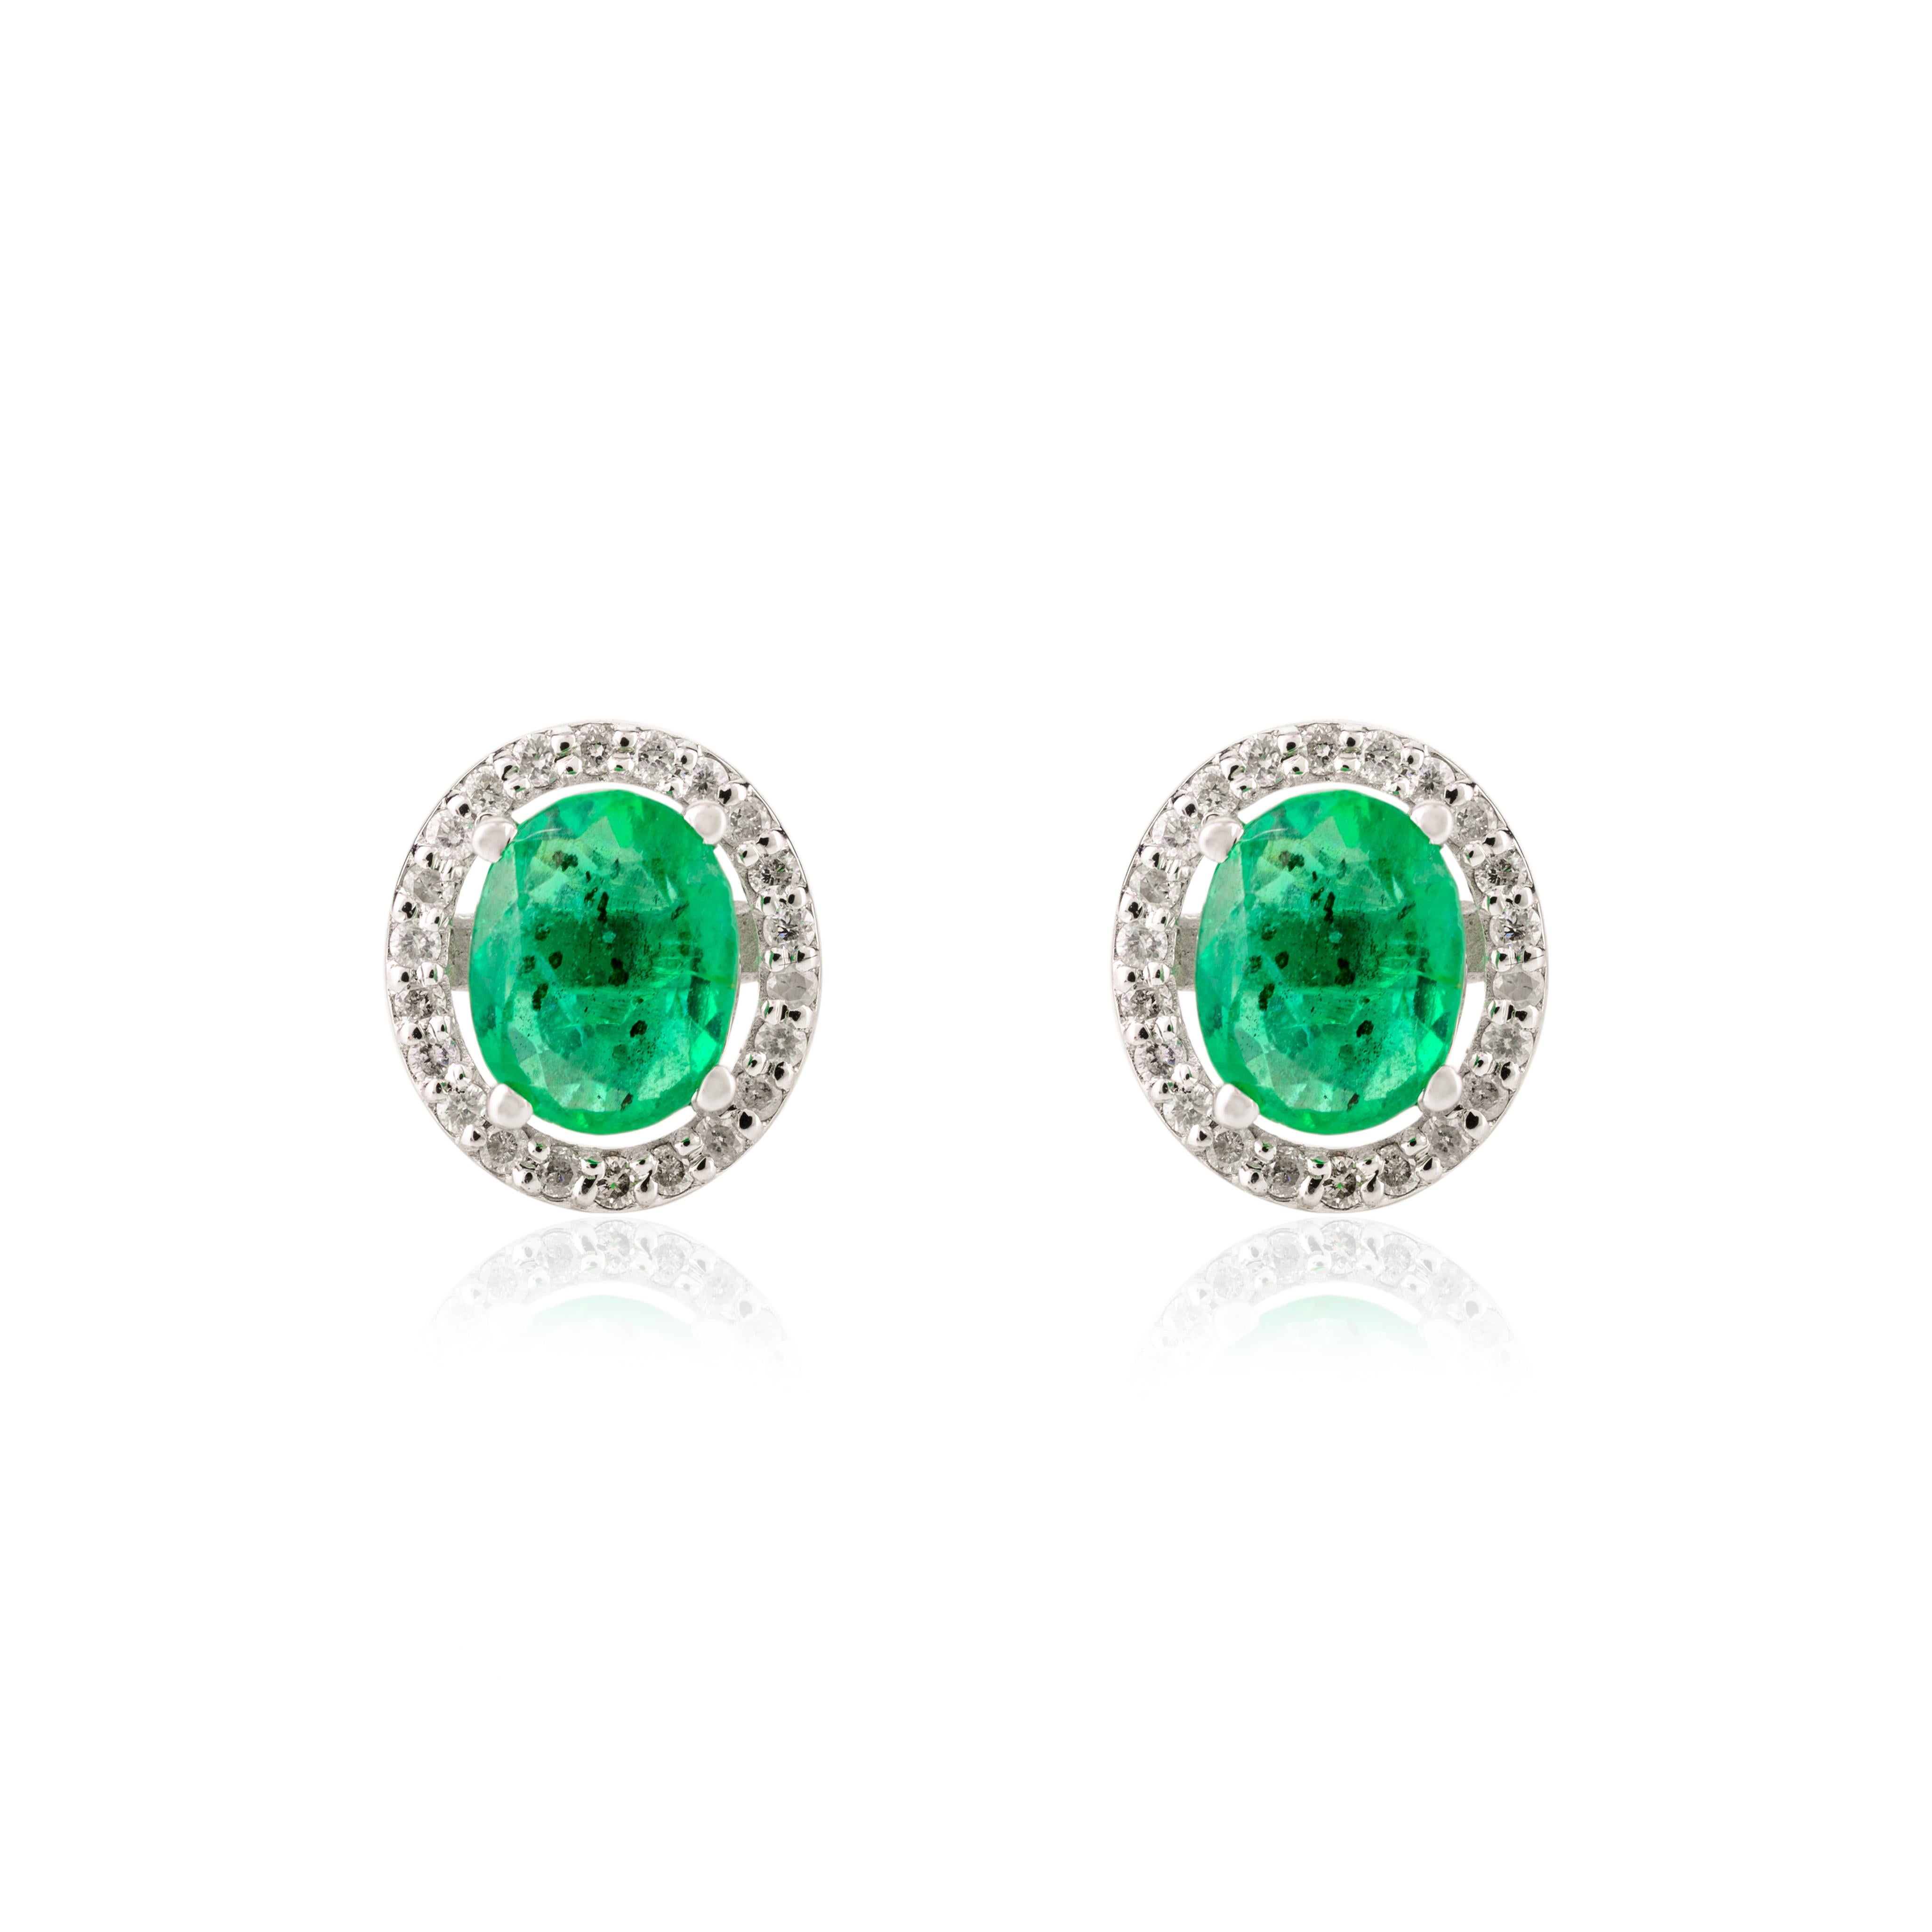 Natural Emerald Diamond Halo Oval Stud Earrings in 14k White Gold Gift for Mom In New Condition For Sale In Houston, TX